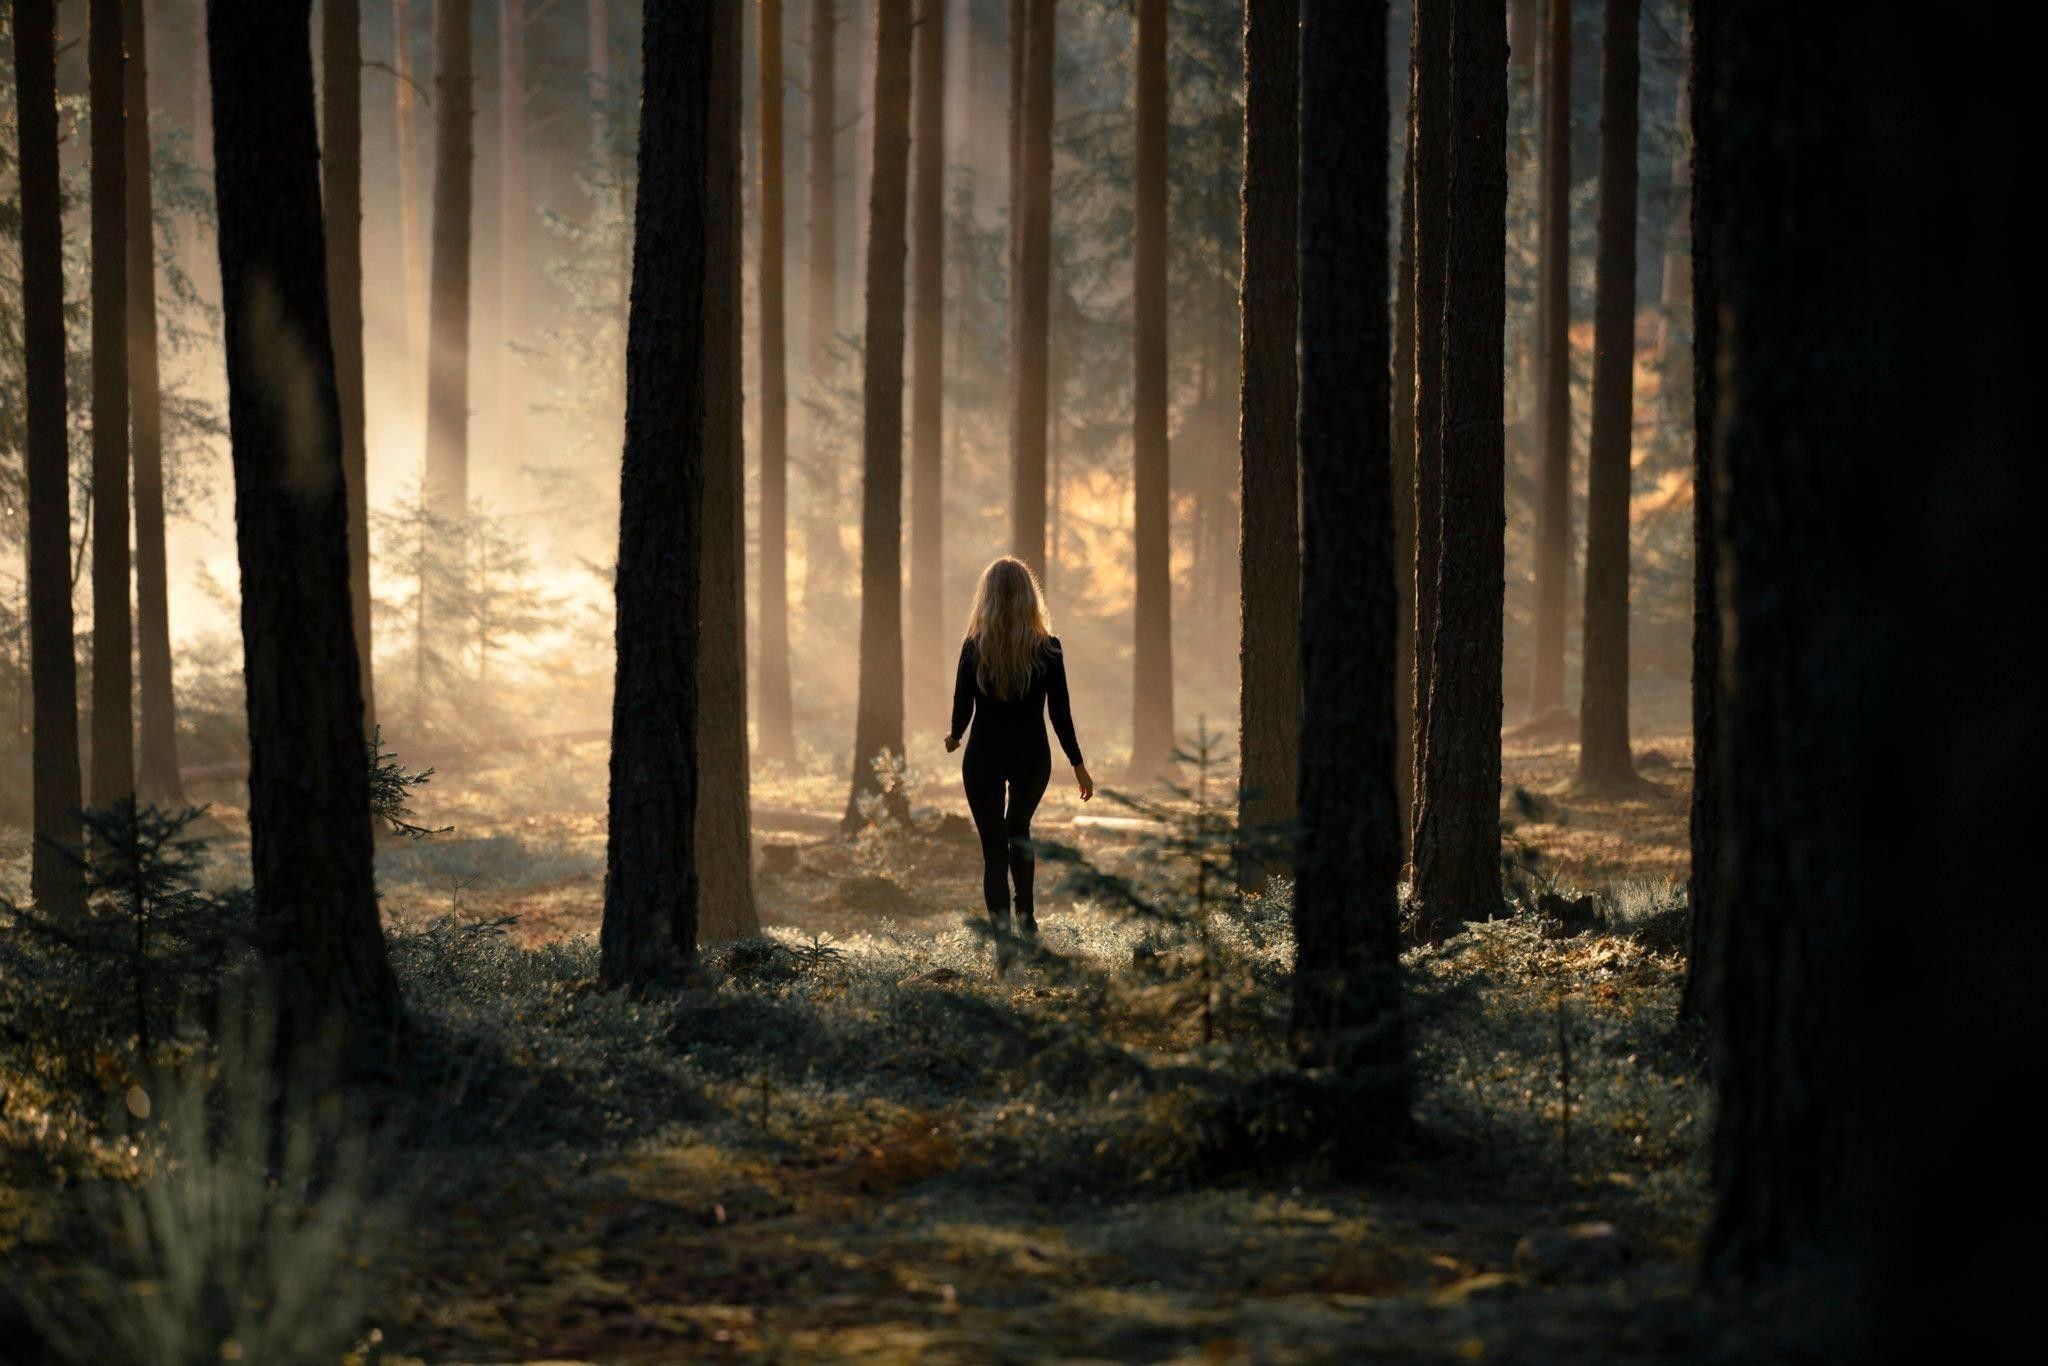 Alone Girl in Forest Wallpaper. Woods photography, Forest picture, Forest wallpaper